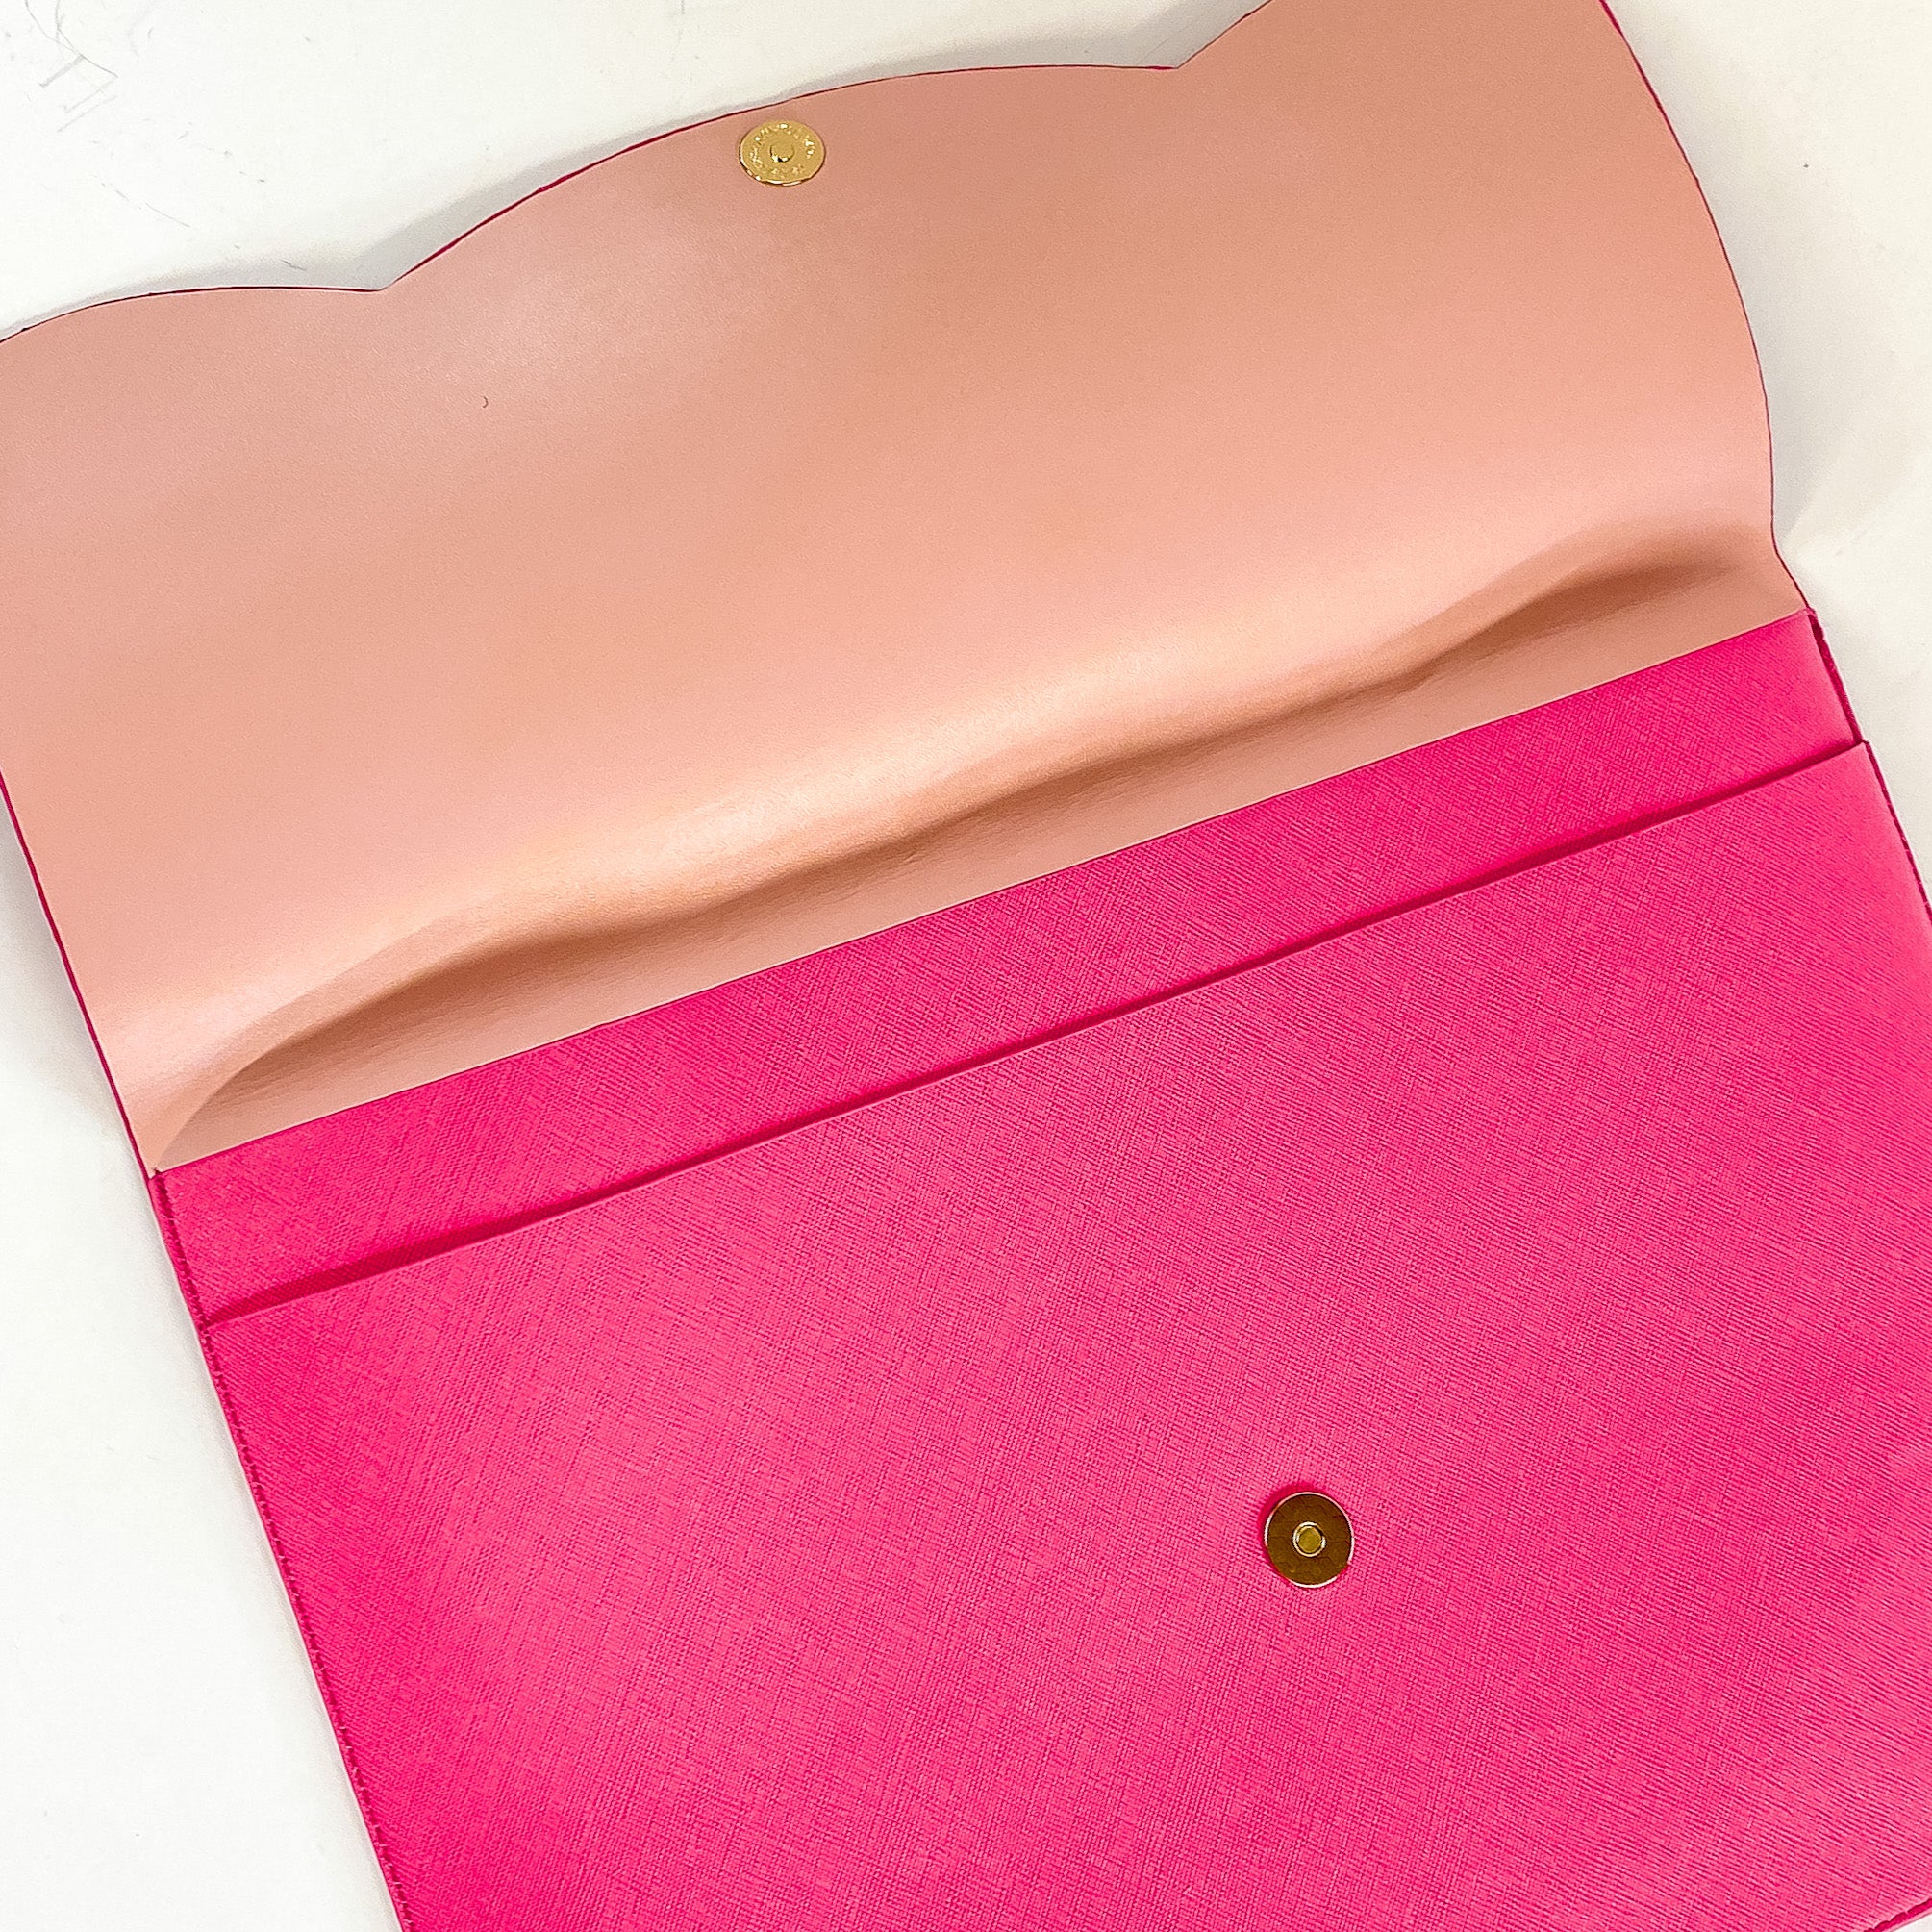 Hollis | Lennyn Laptop Sleeve in Hot Pink - Giddy Up Glamour Boutique